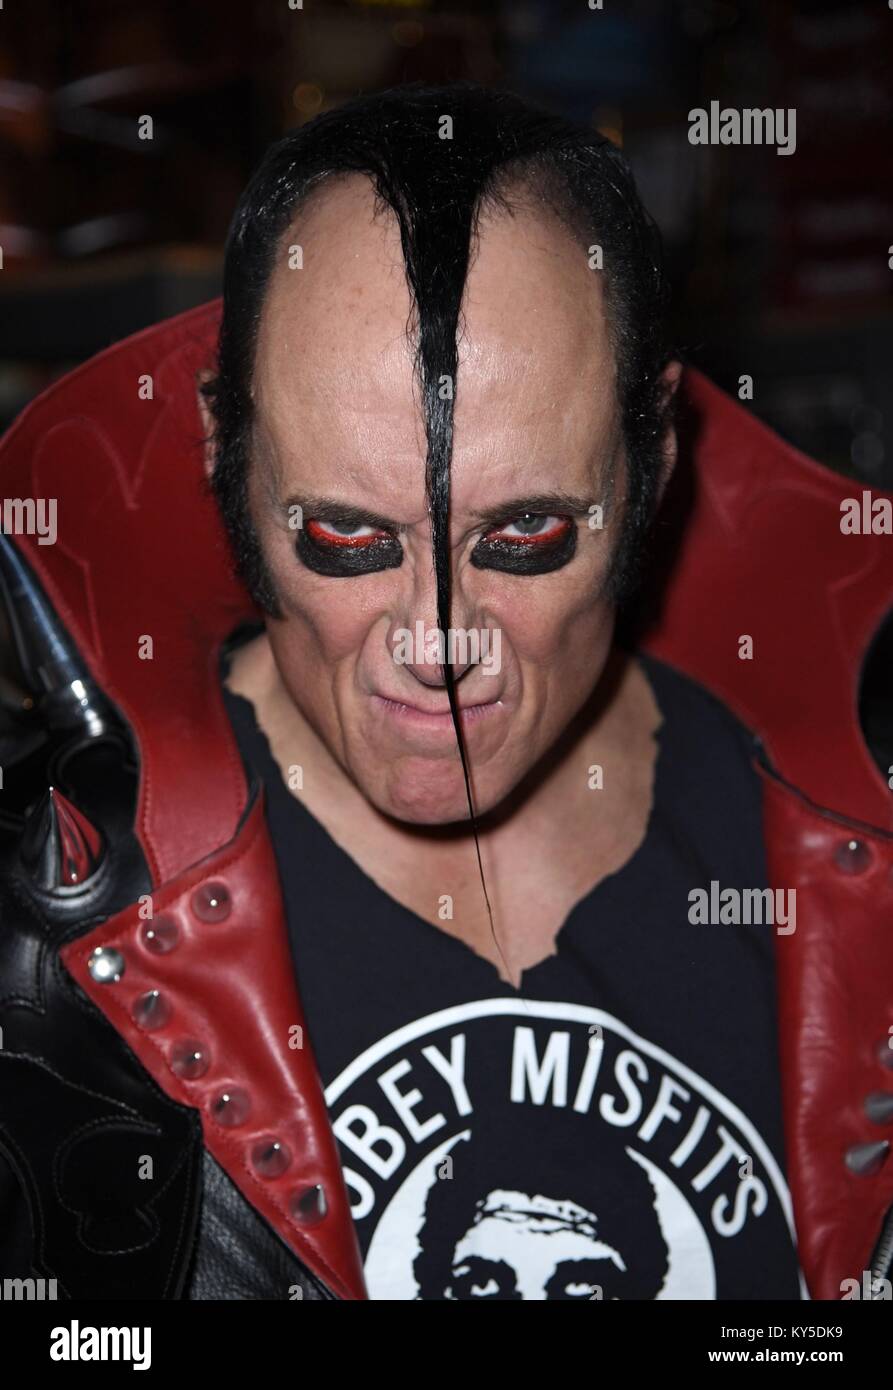 New York, NY, USA. 11th Jan, 2018. Jerry Only, The Misfits at arrivals for Dr. Demento Covered in Punk Release Party, Forbidden Planet, New York, NY January 11, 2018. Credit: Derek Storm/Everett Collection/Alamy Live News Stock Photo